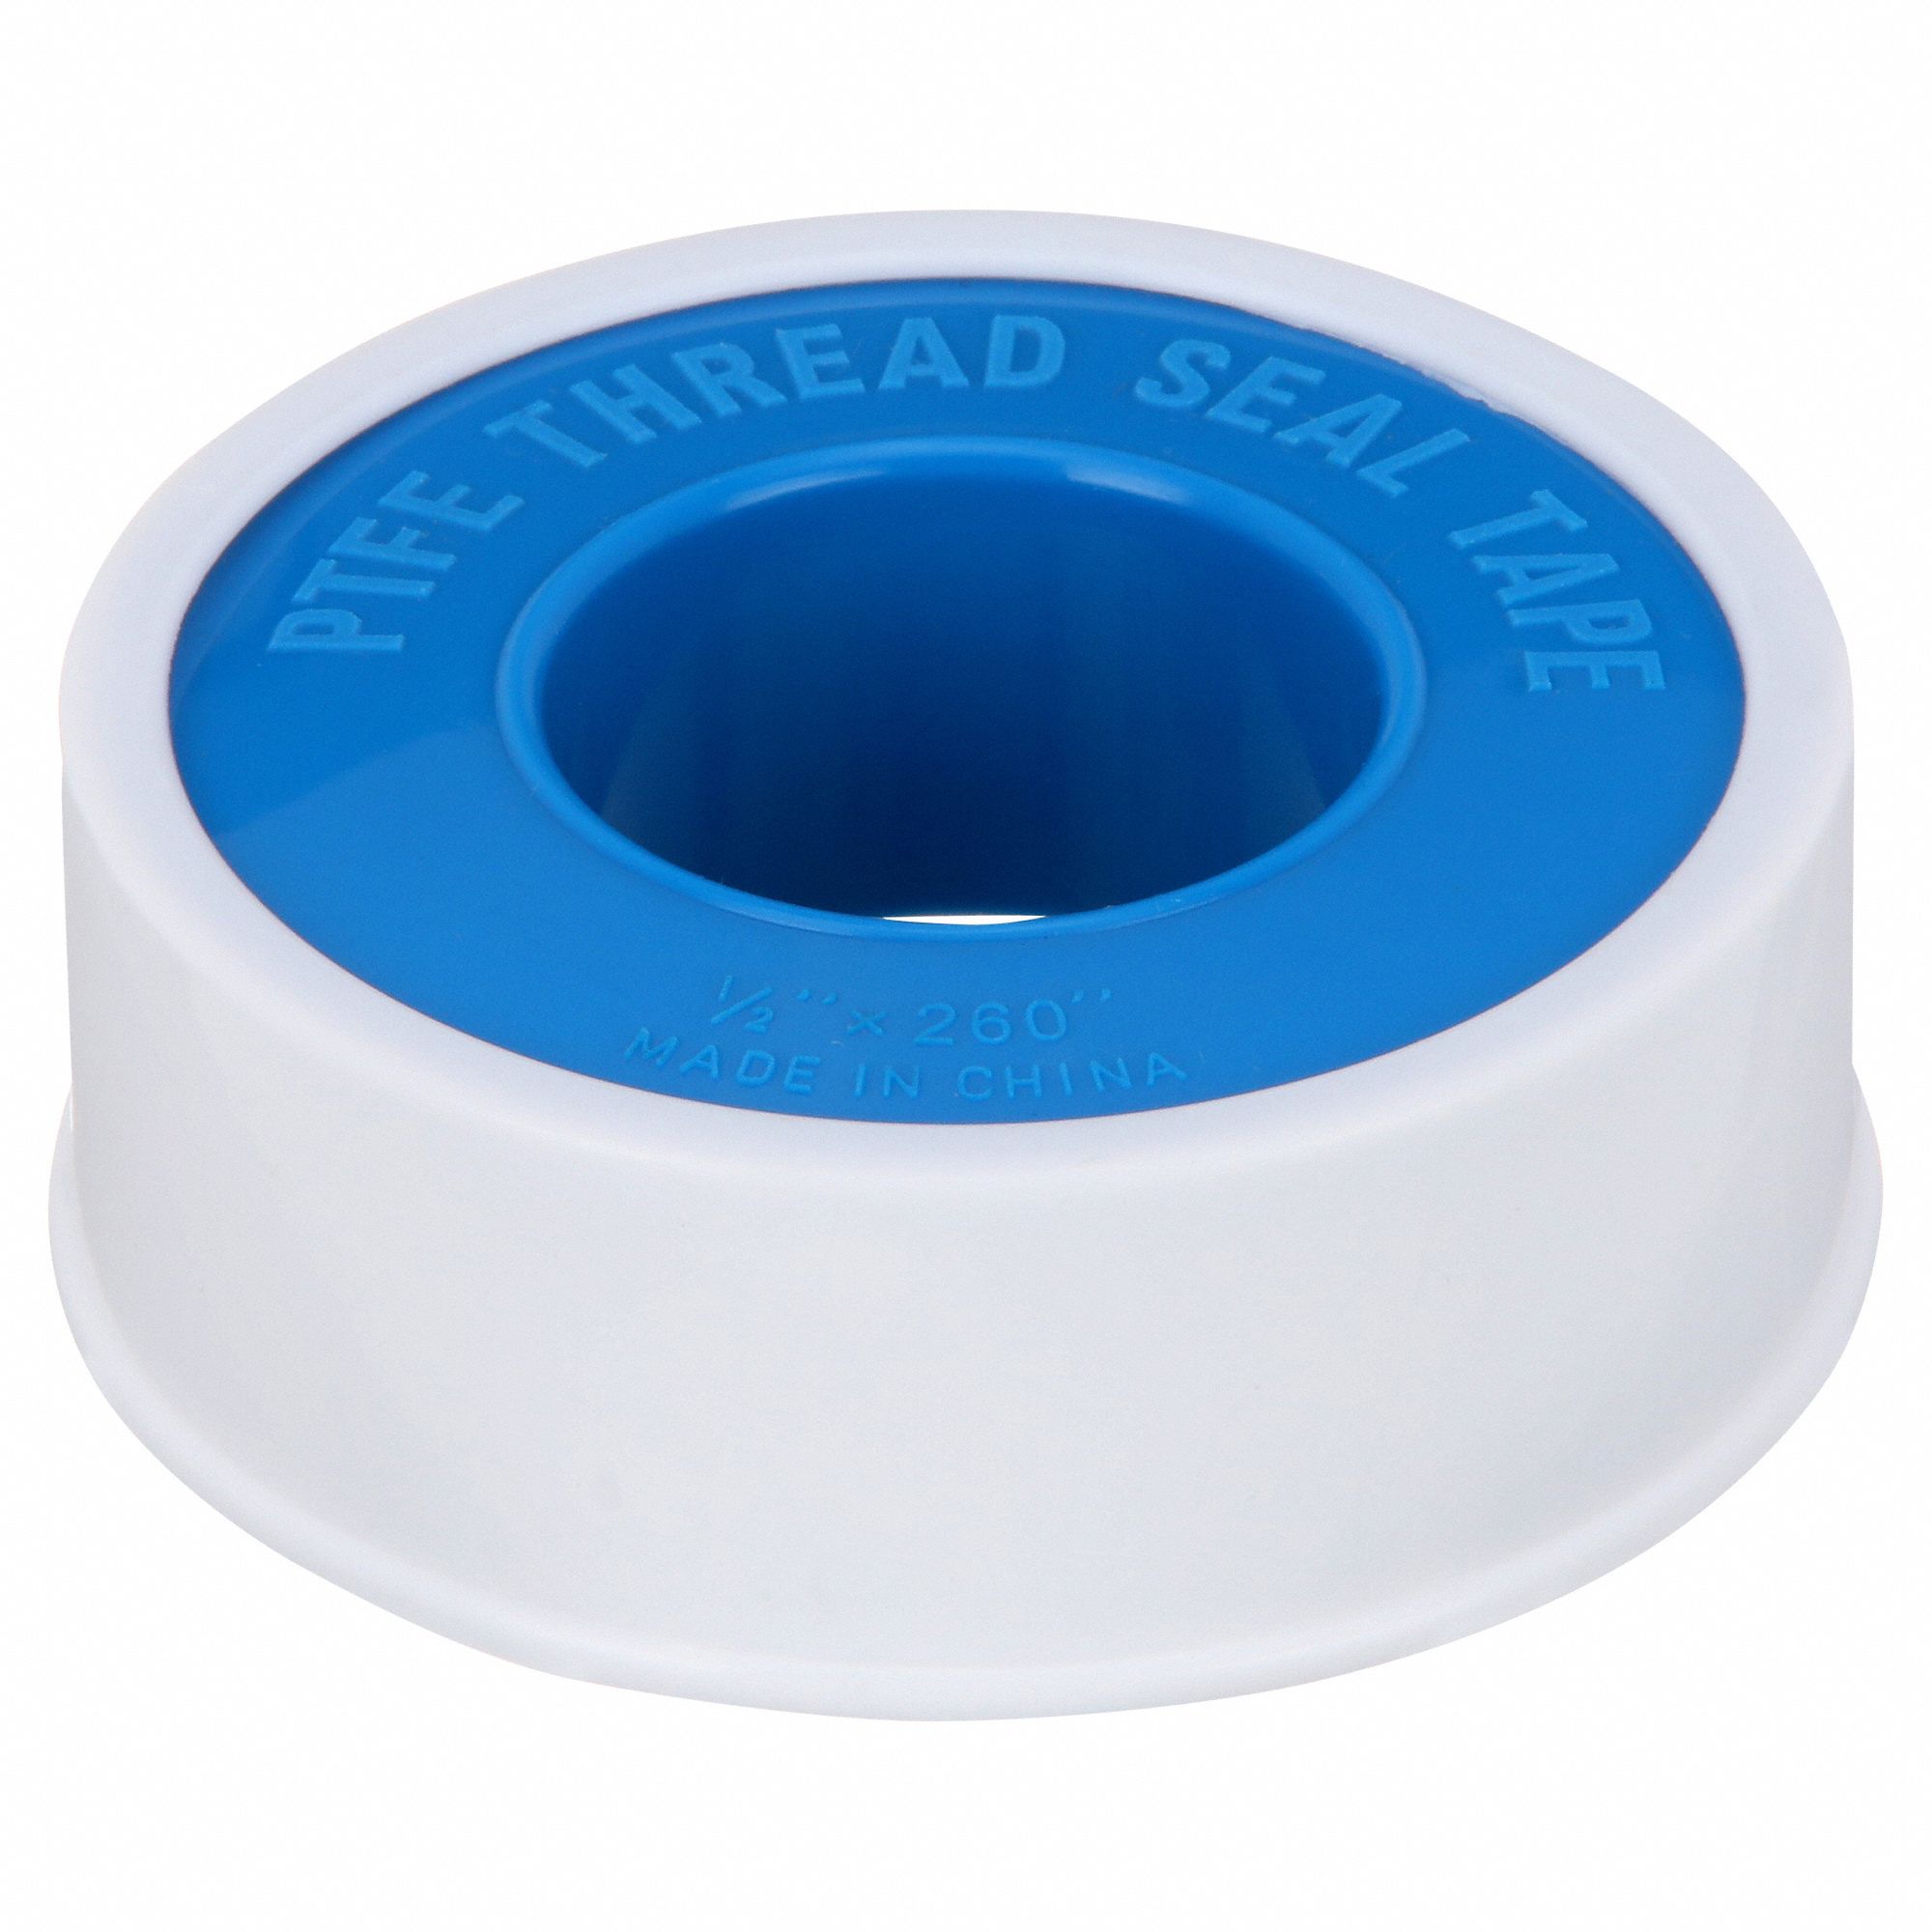 China Customized Teflon Seal Tape Suppliers, Manufacturers